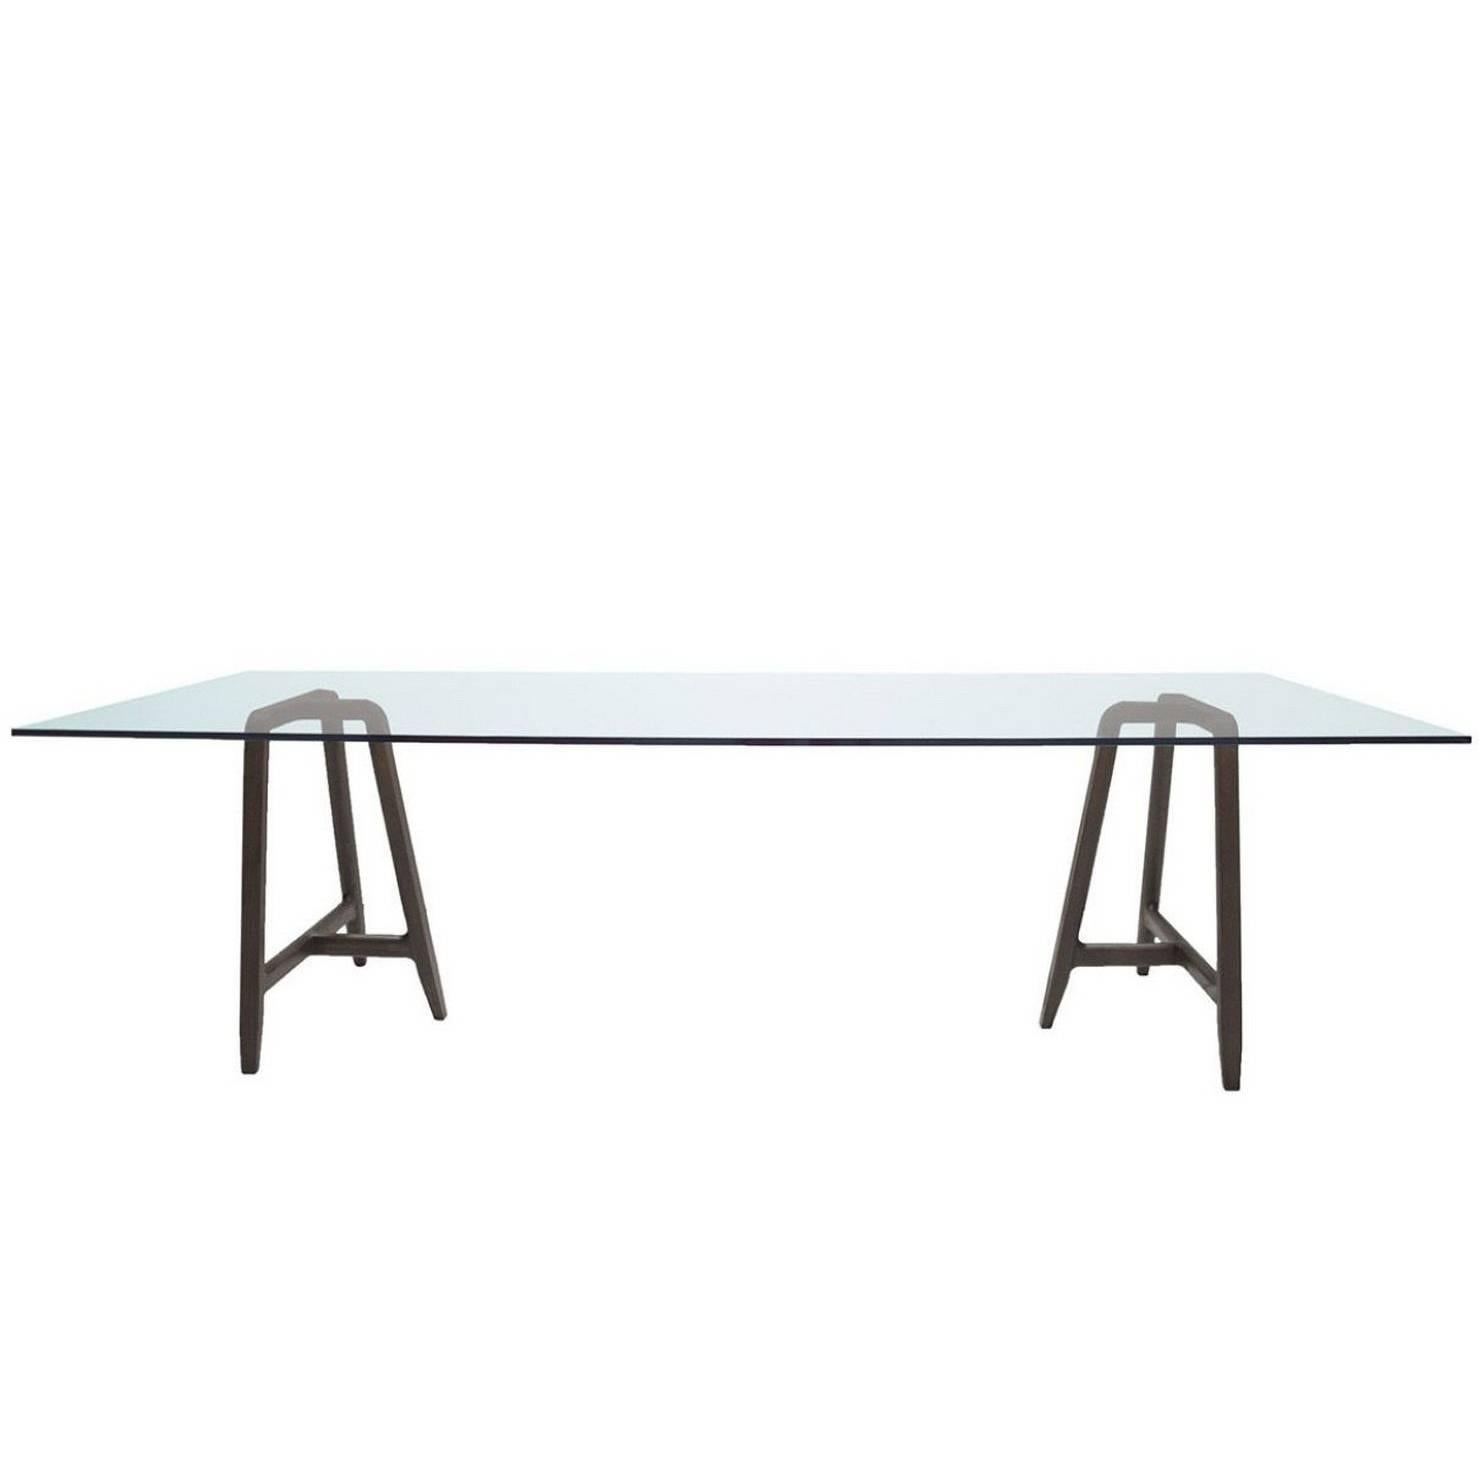 "Easel" Tempered Glass Top and Ash Base Table by L. and R. Palomba for Driade